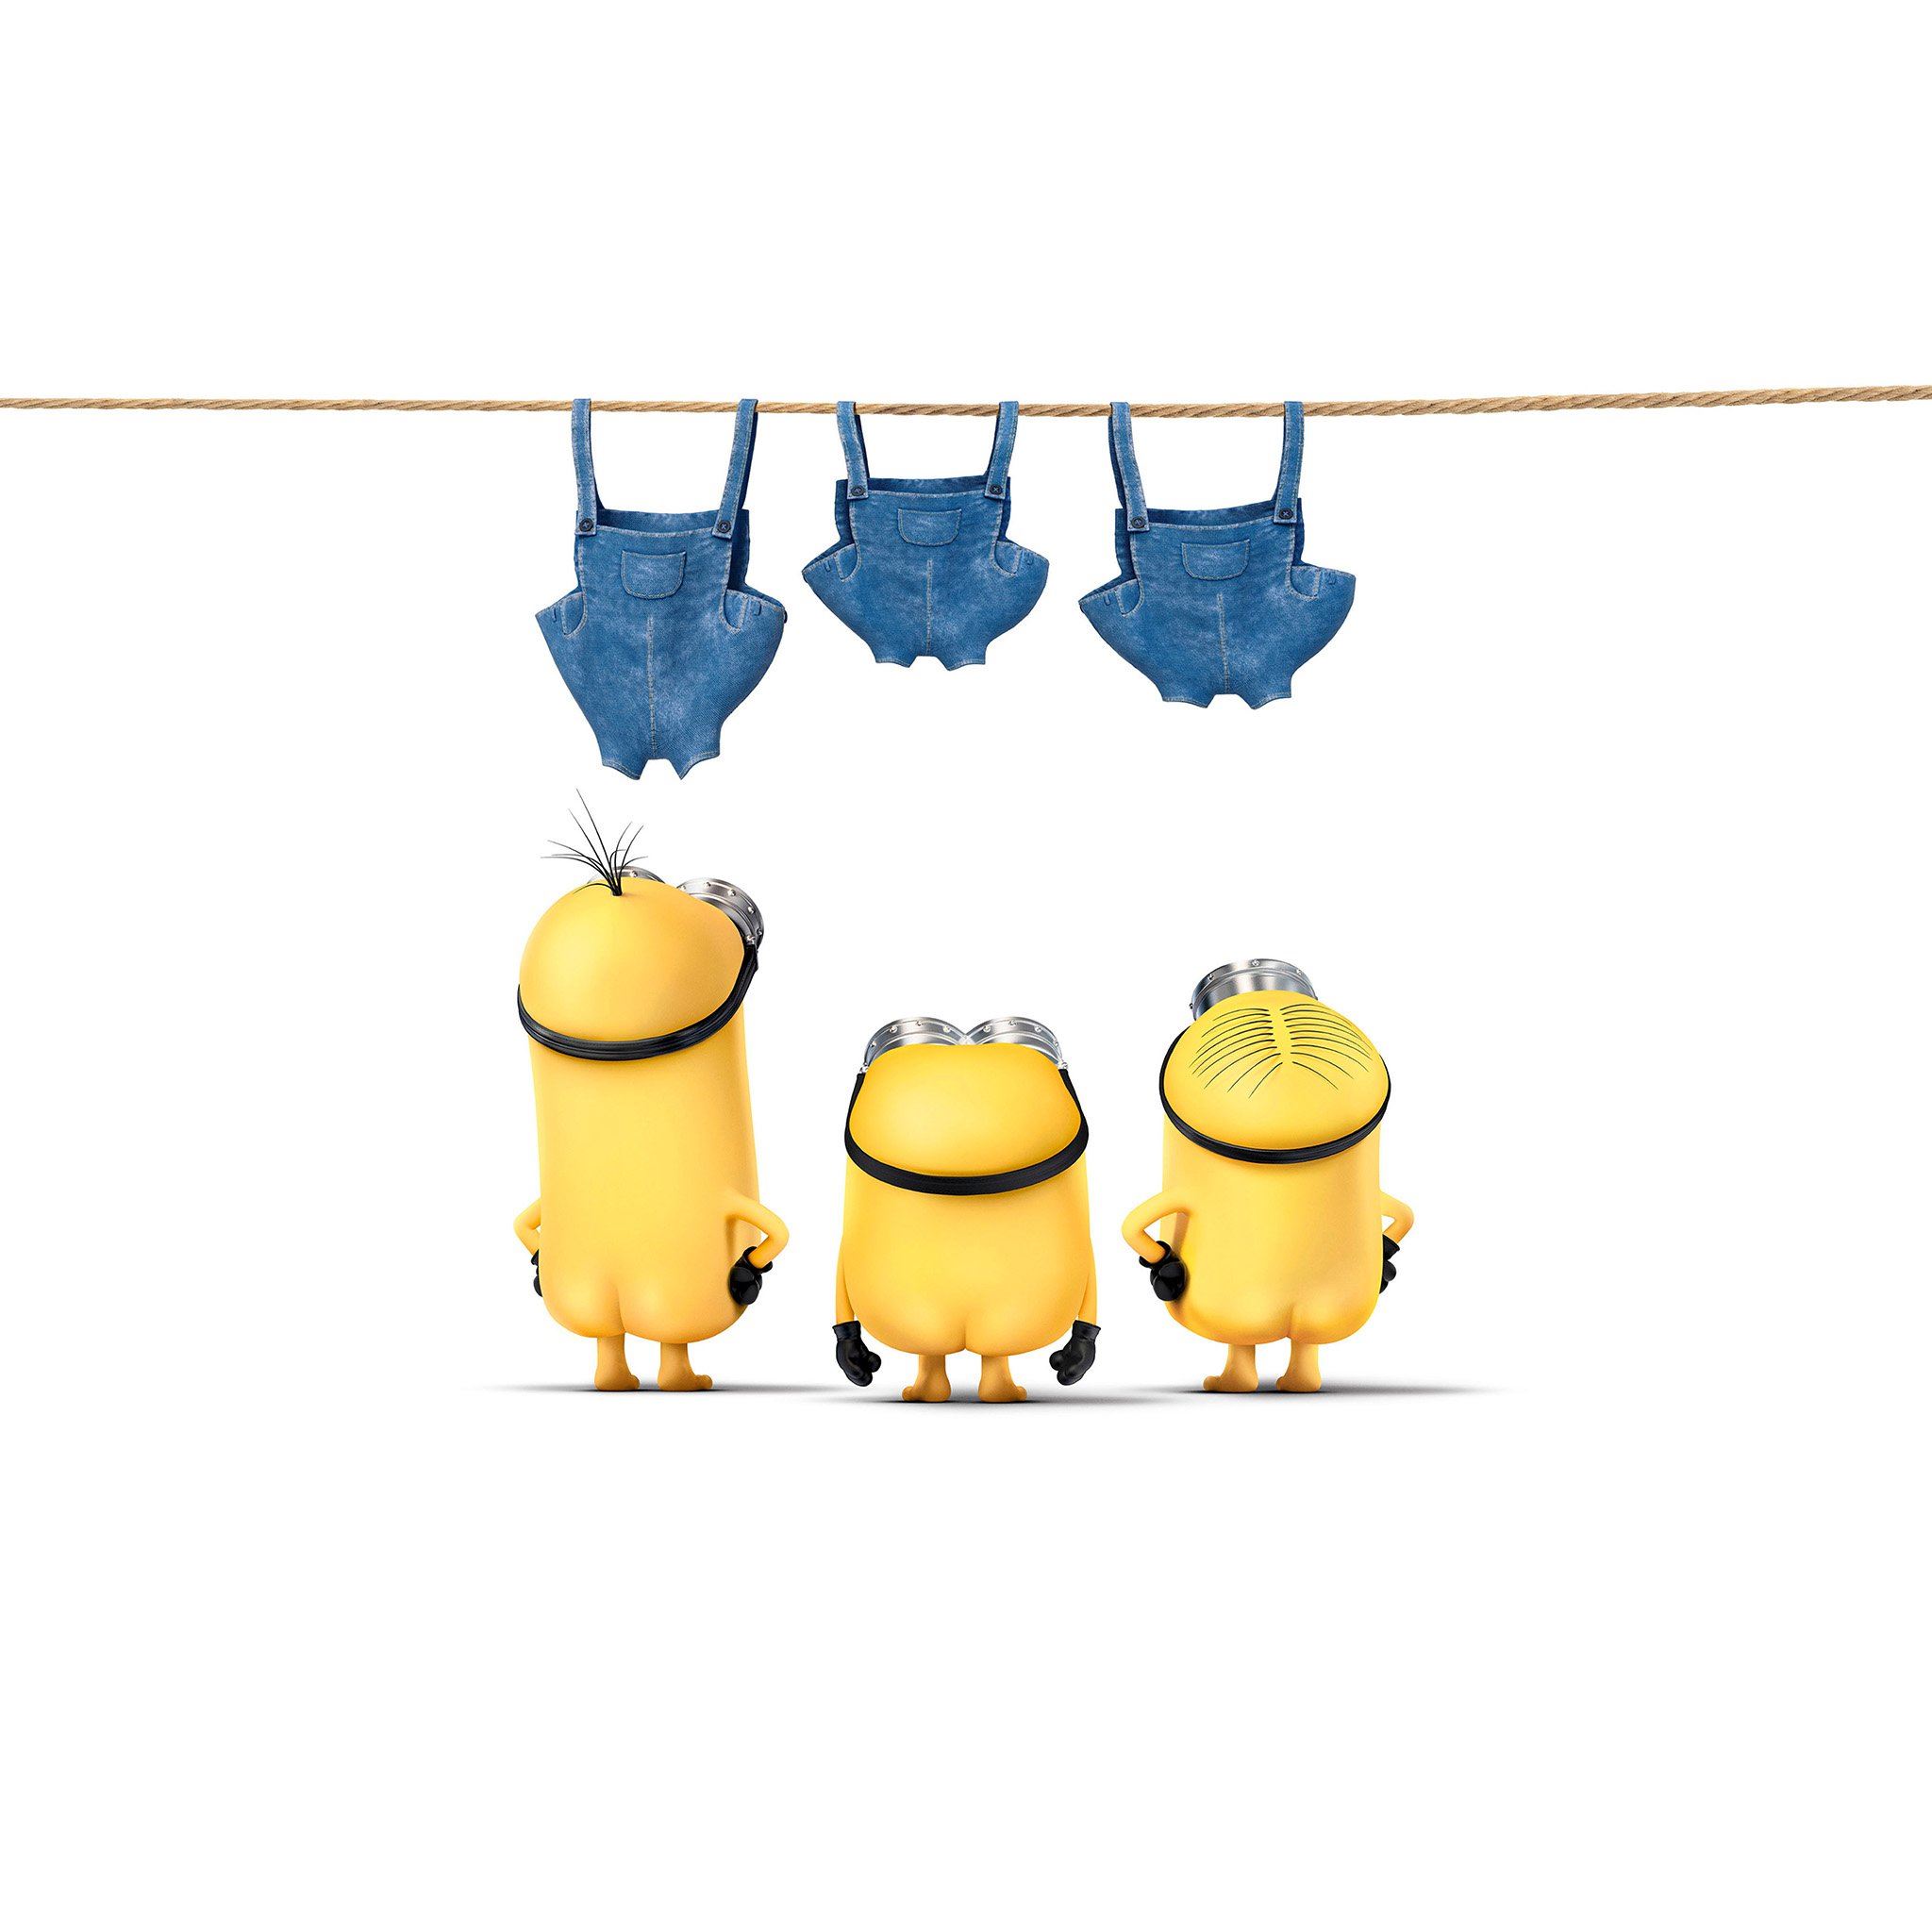 Minions Despicable Nude Me Cute Yellow Art Illustration iPad Air wallpaper 